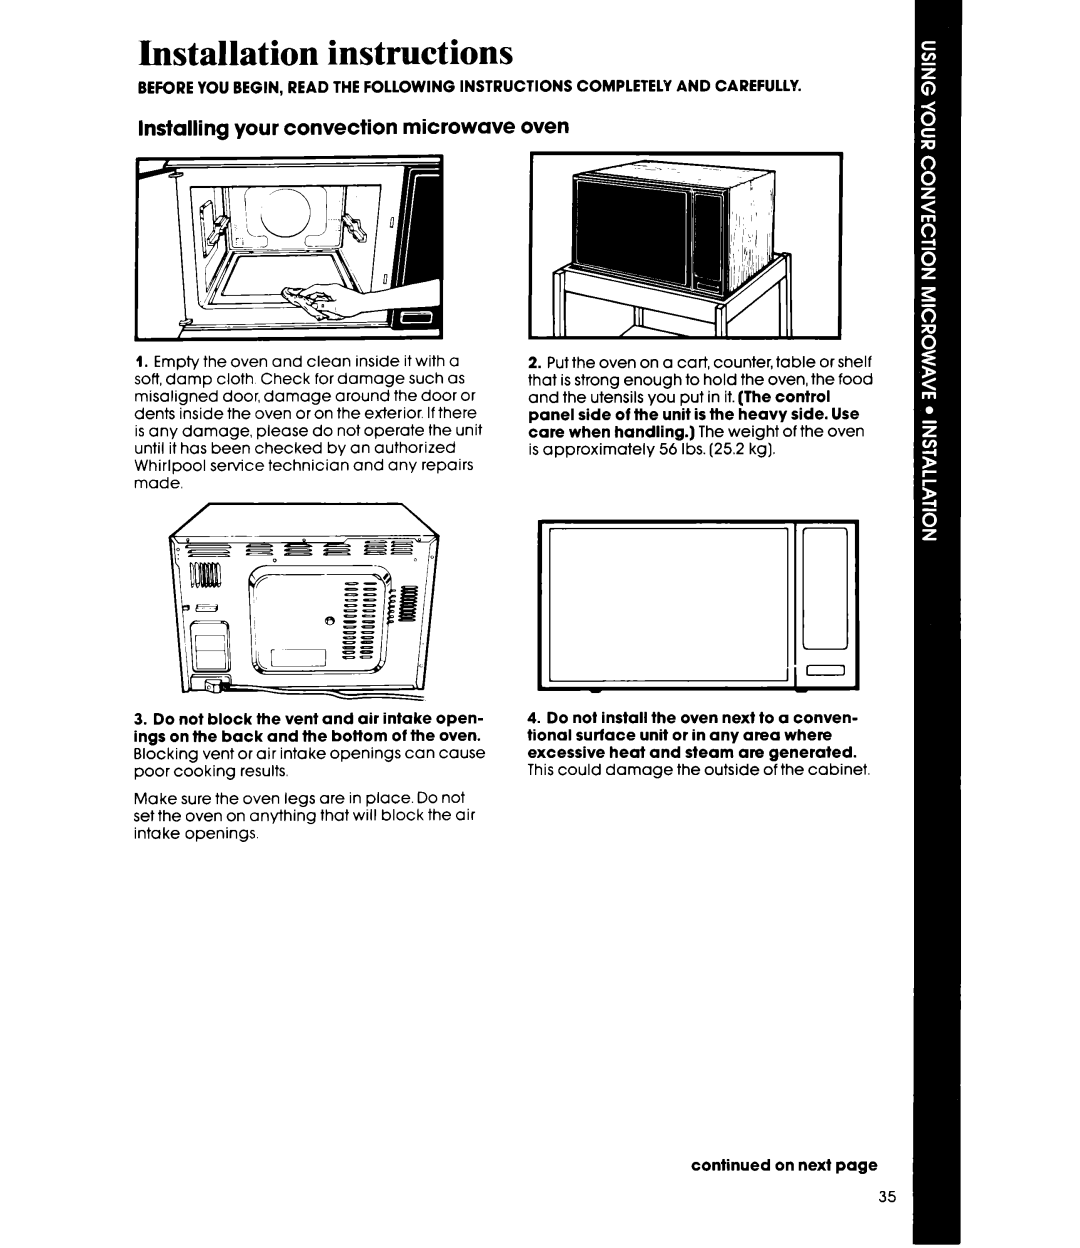 Whirlpool MC8990XT, MC8991XT manual Installation instructions, Installing your convection microwave oven 